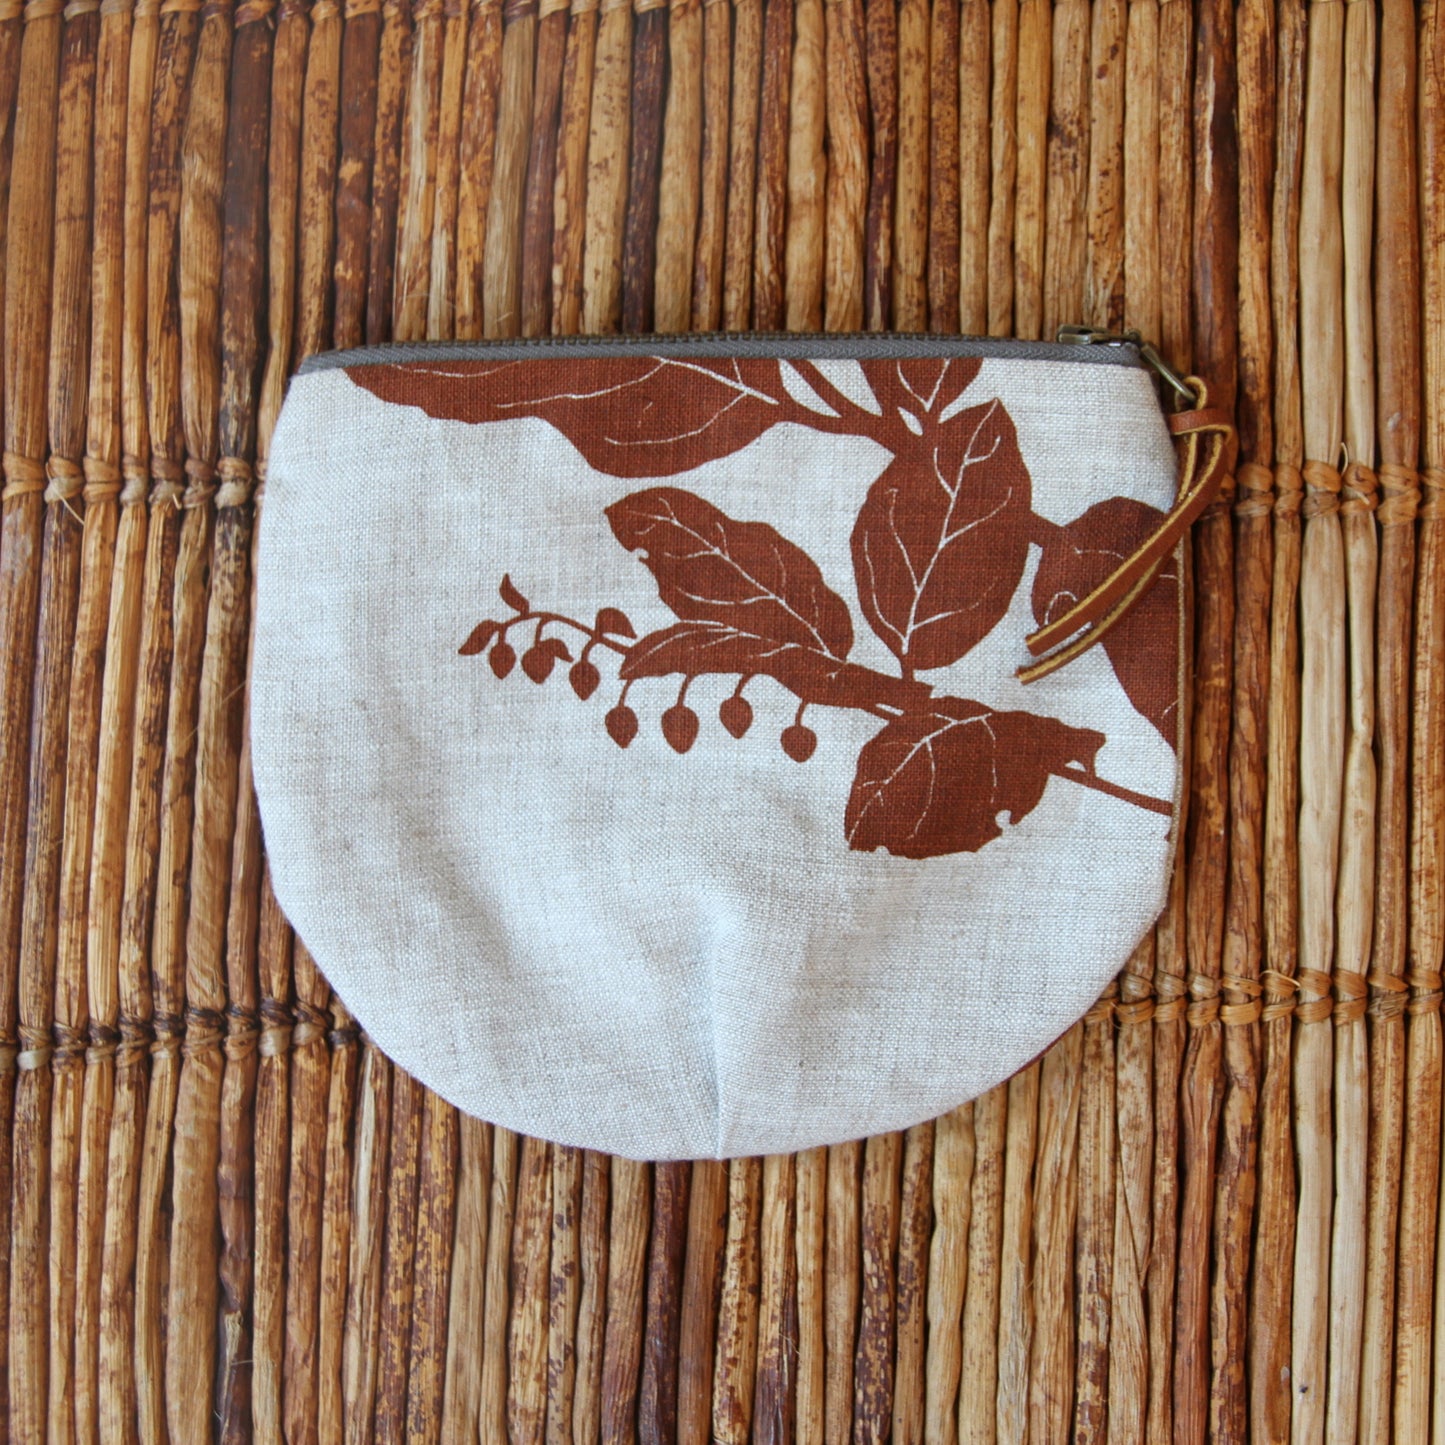 5" Pouch - Salal in Brown on Flax